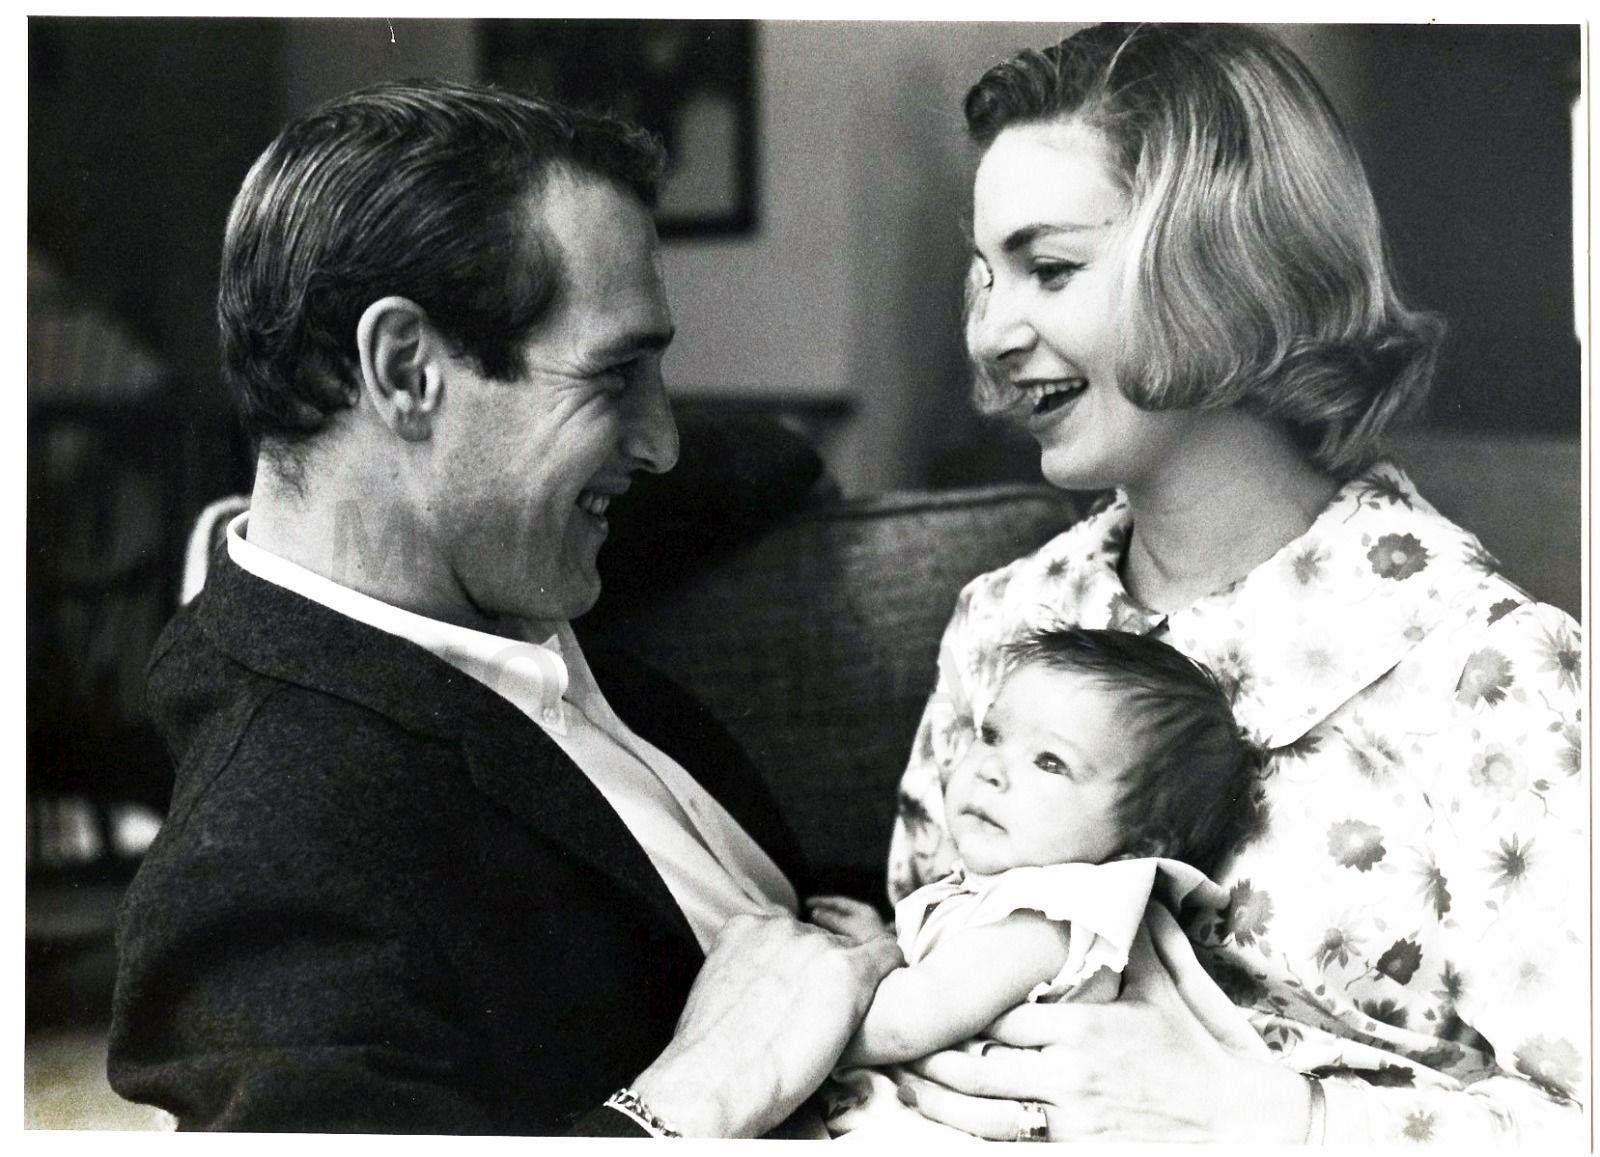 Paul and Joanne with their daughter